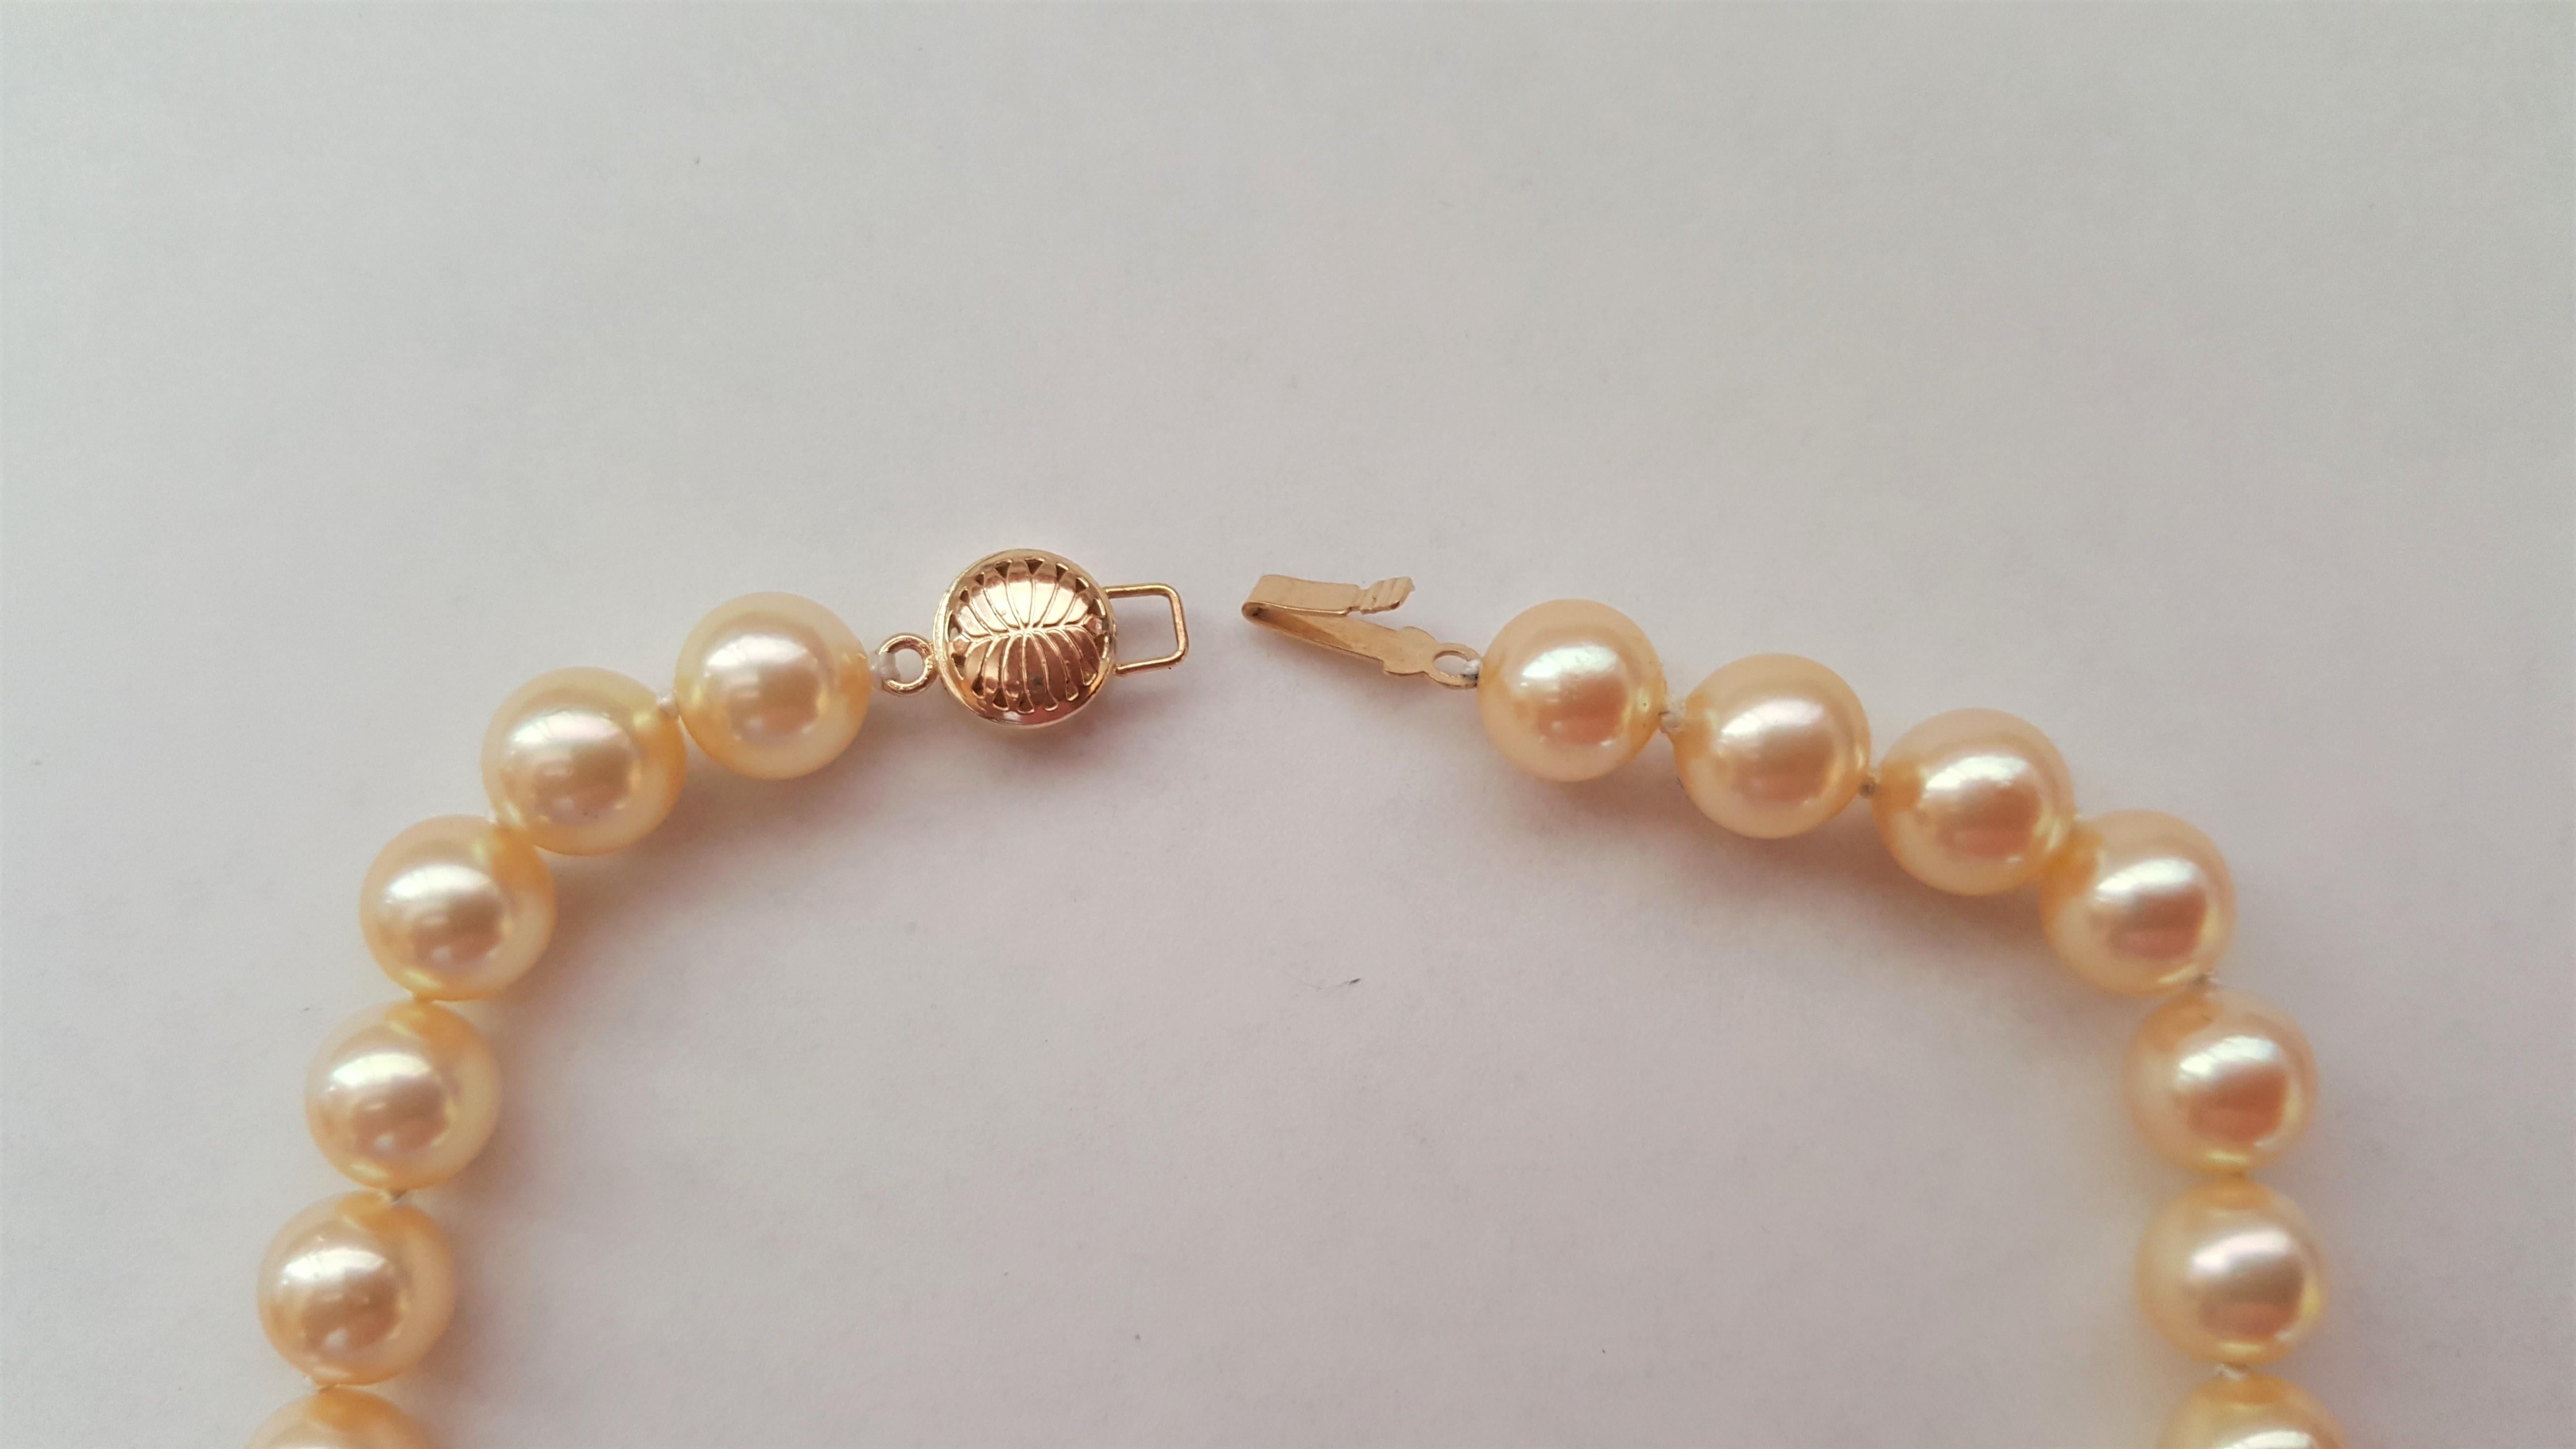 Cream Gold AAA Grade Cultured Pearl Set Necklace Bracelet 14kt, 7+mm, 27 Inches For Sale 1